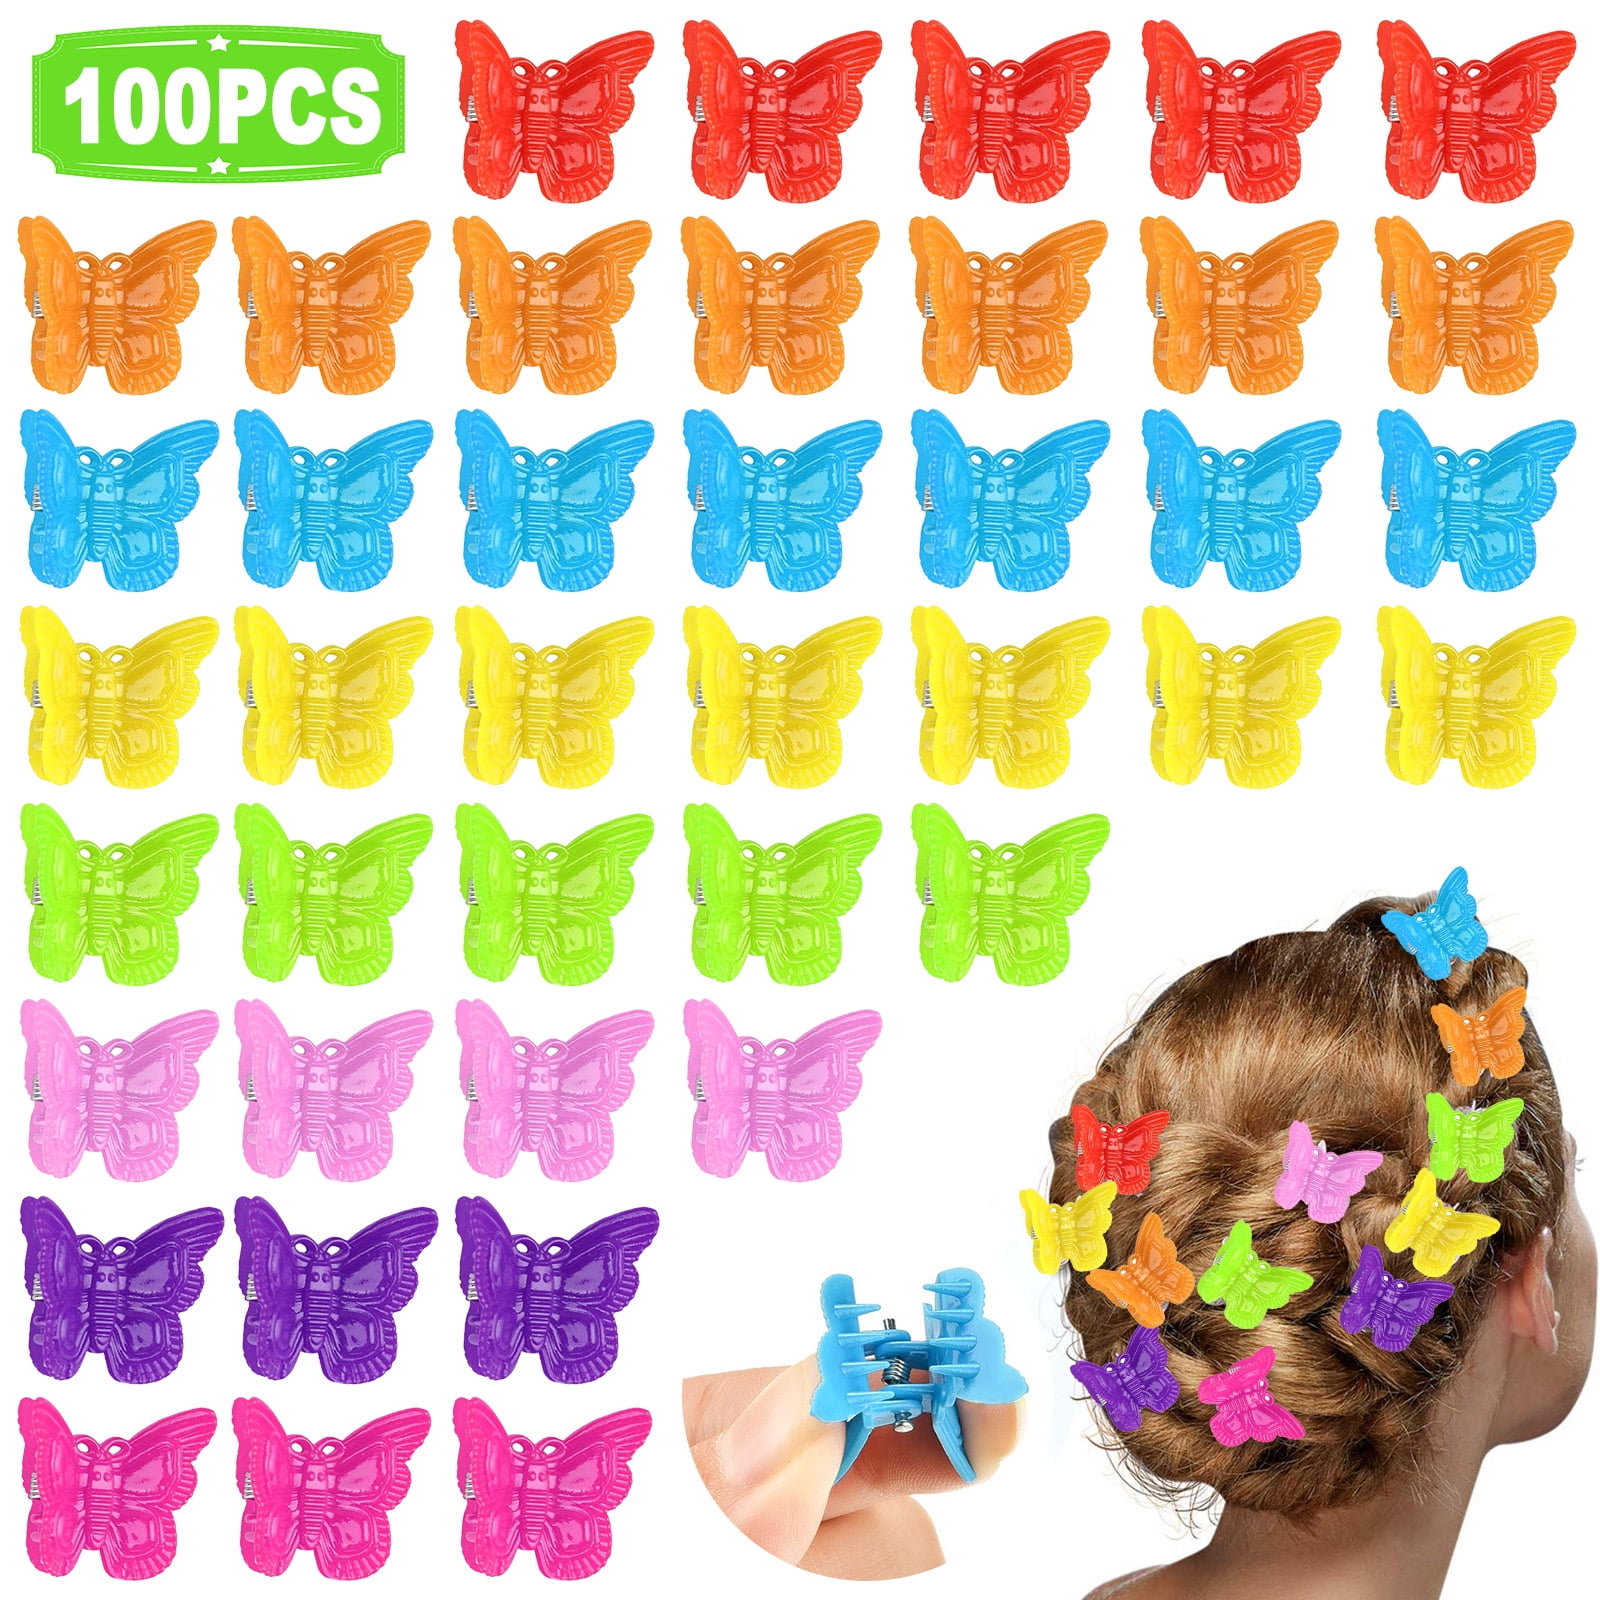 30X Baby Girls Hairpins Mini Claw Hair Clip Clamp Flower Plastic Clips Tools Set 